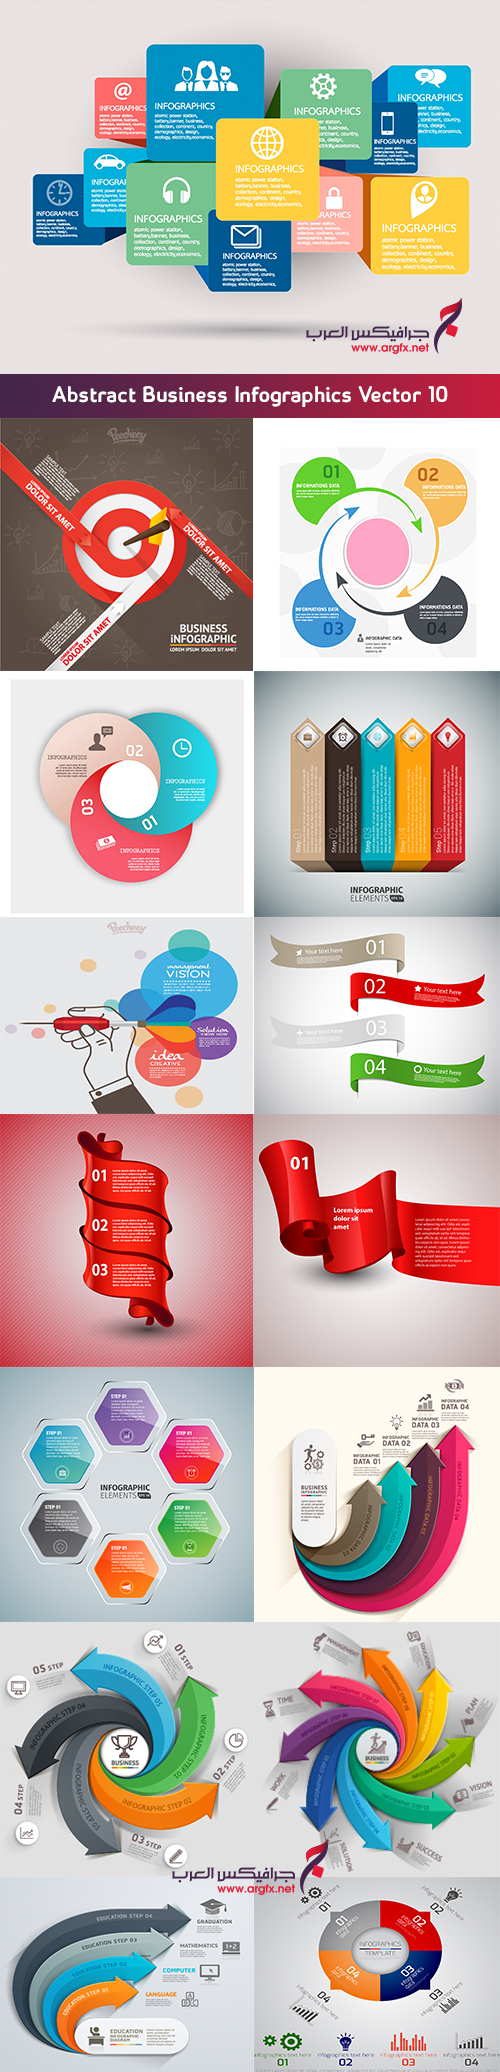 Abstract business infographics vector 10